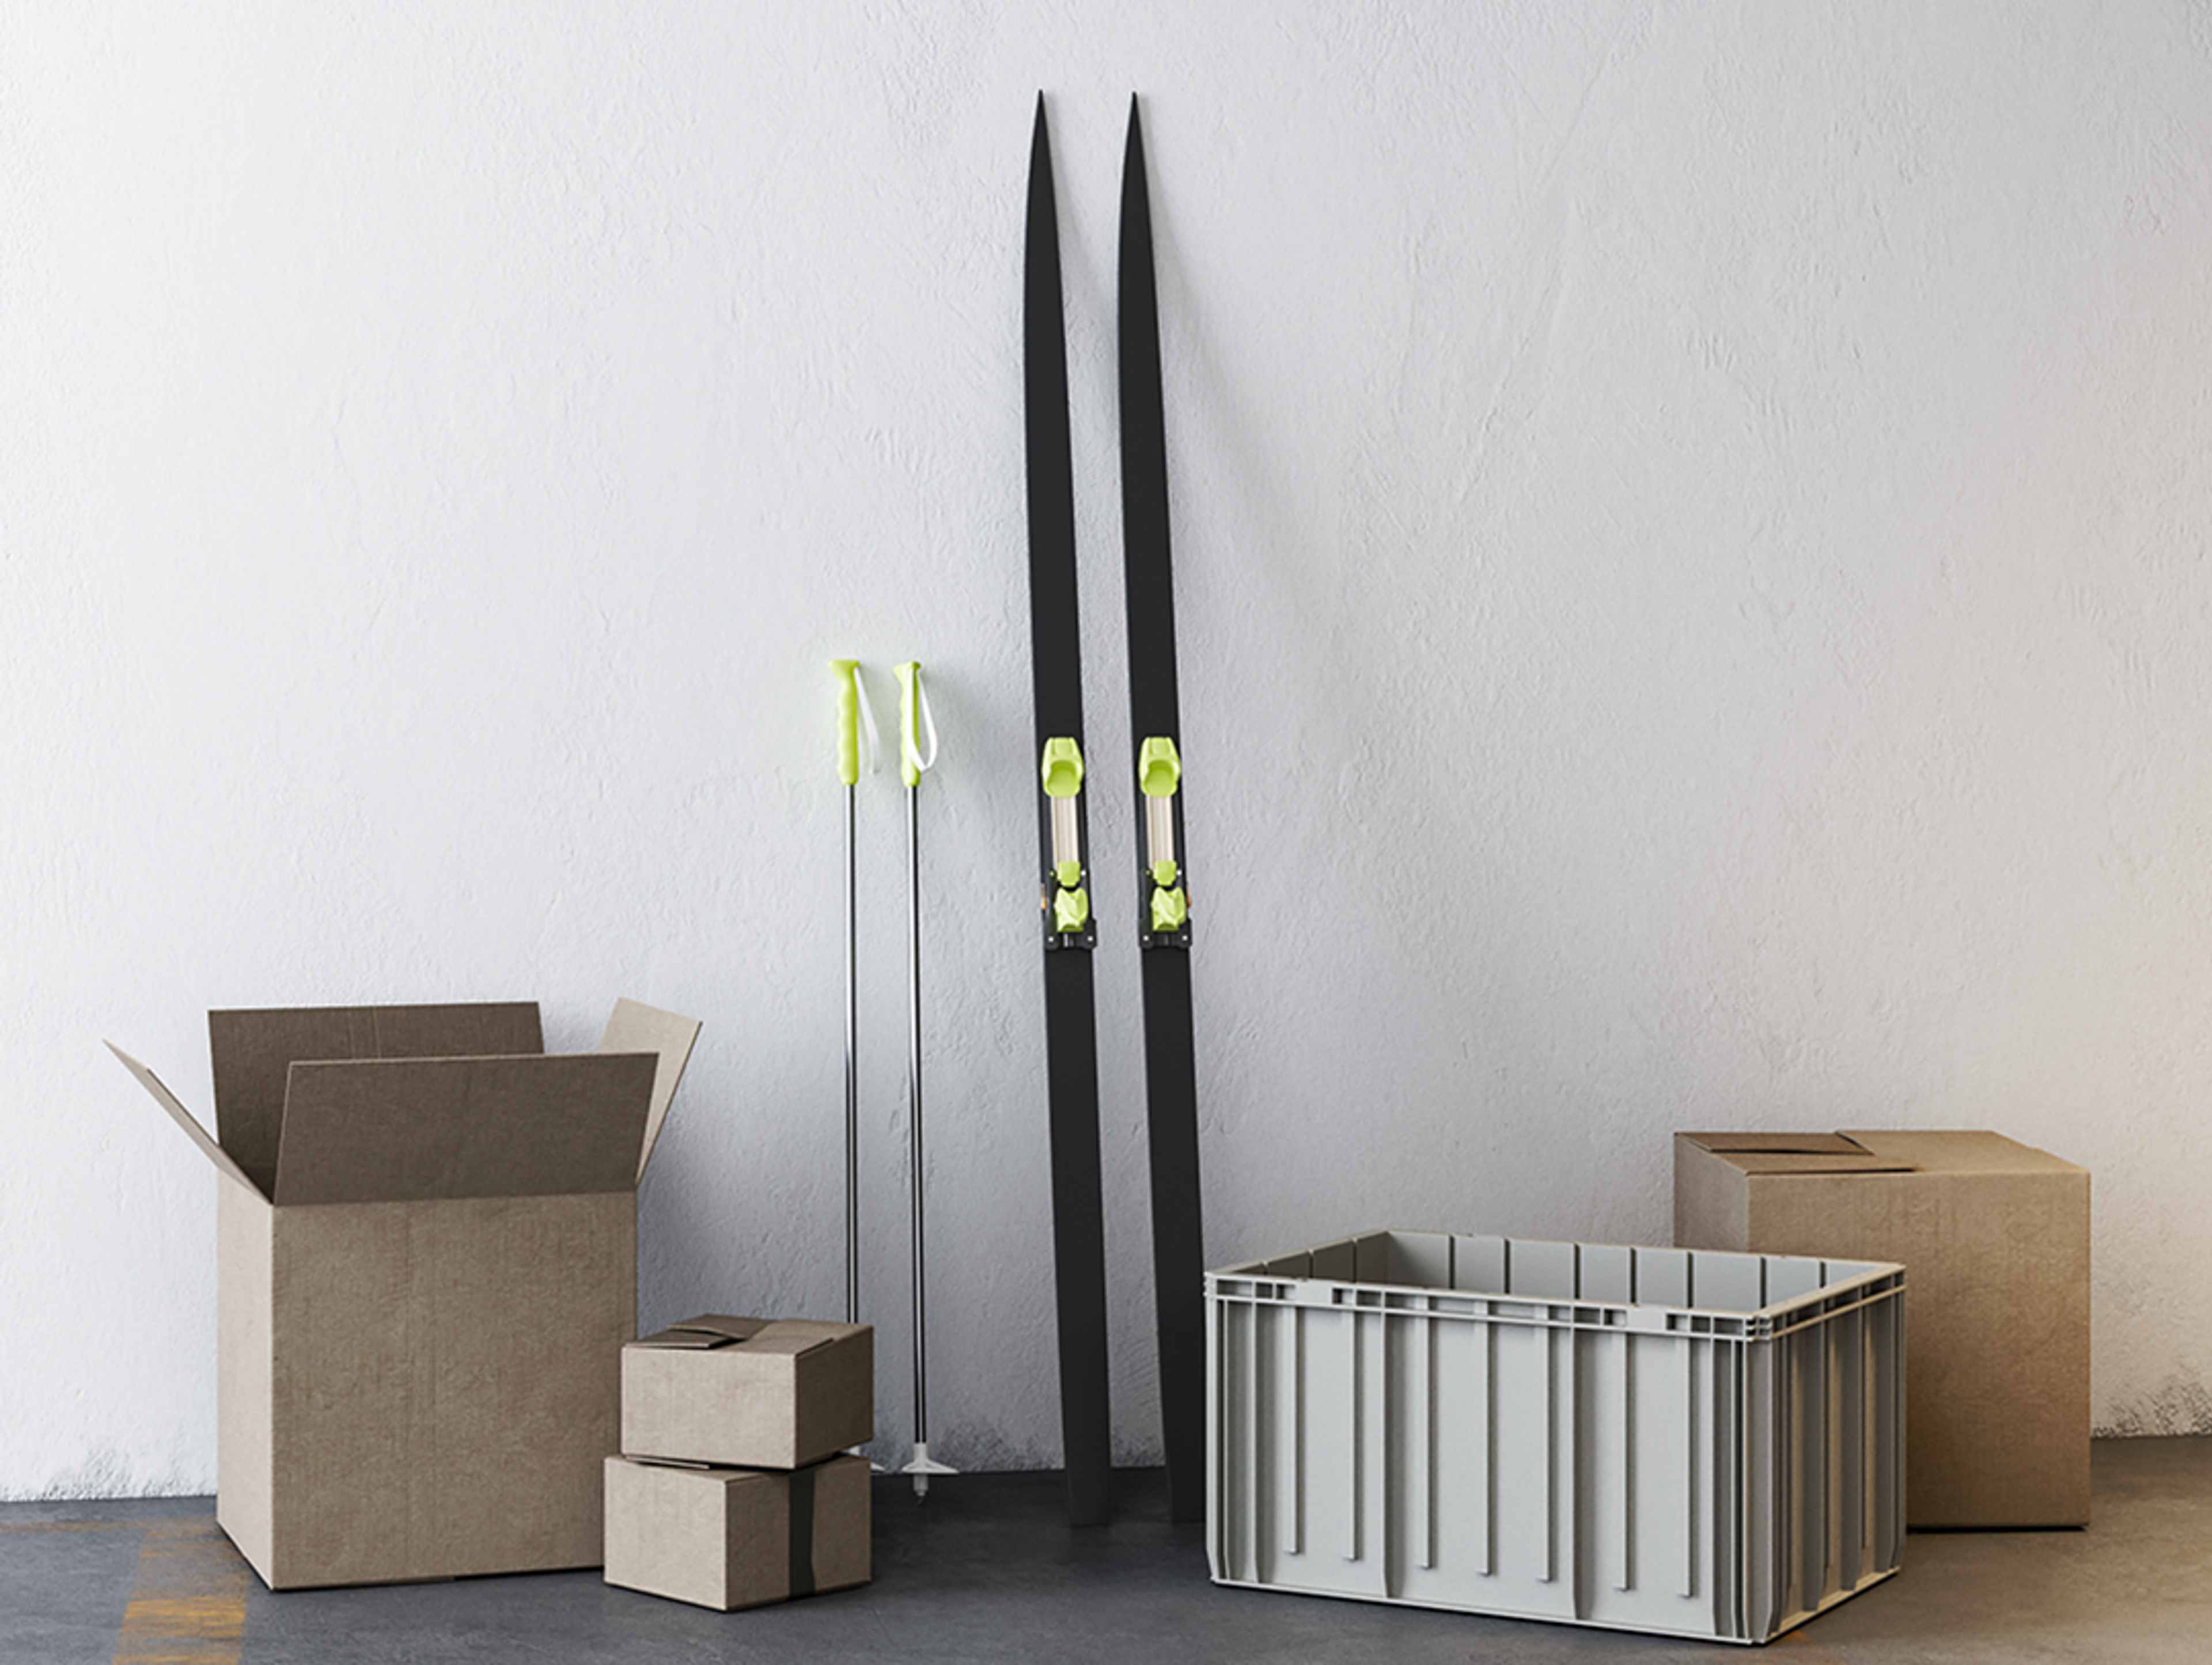 a pair of black skis and some boxes in a warehouse